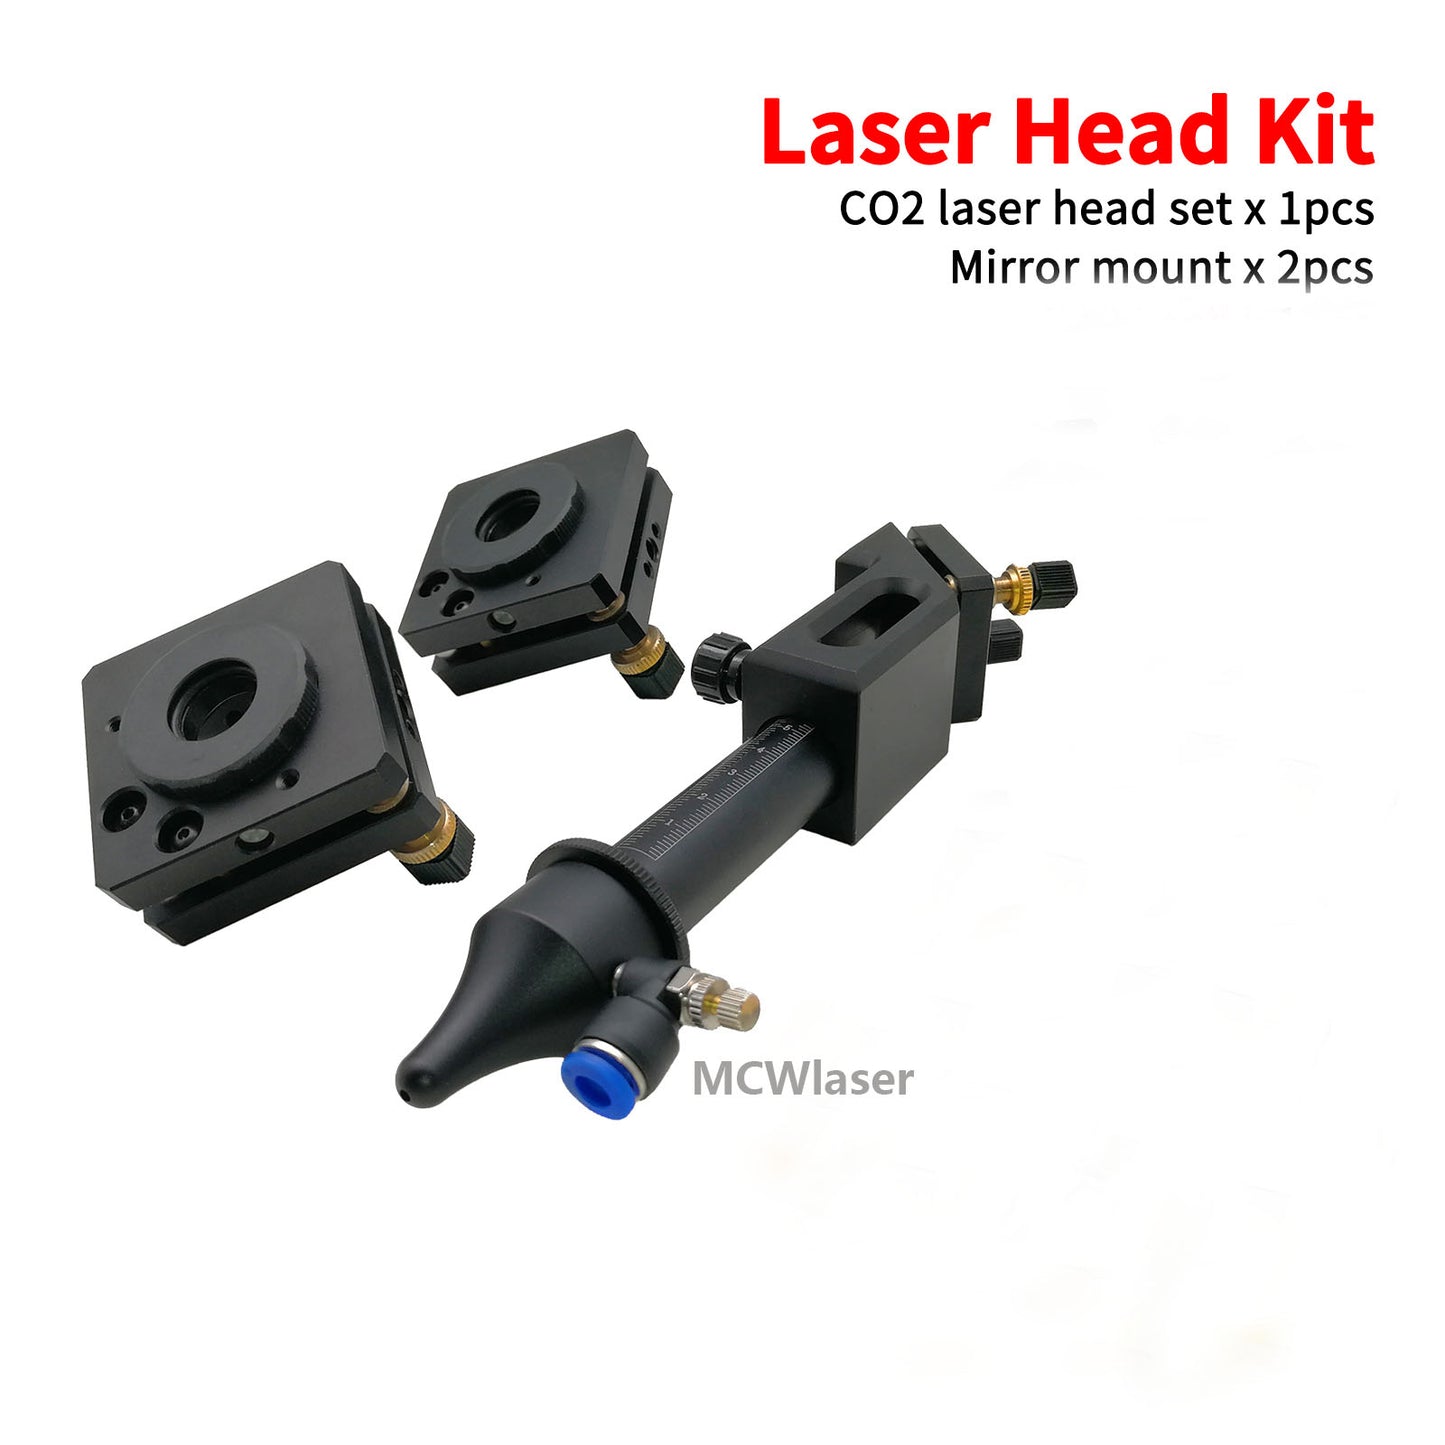 MCWlaser Laser Head kits For CO2 Laser Engraving Cutting Machine